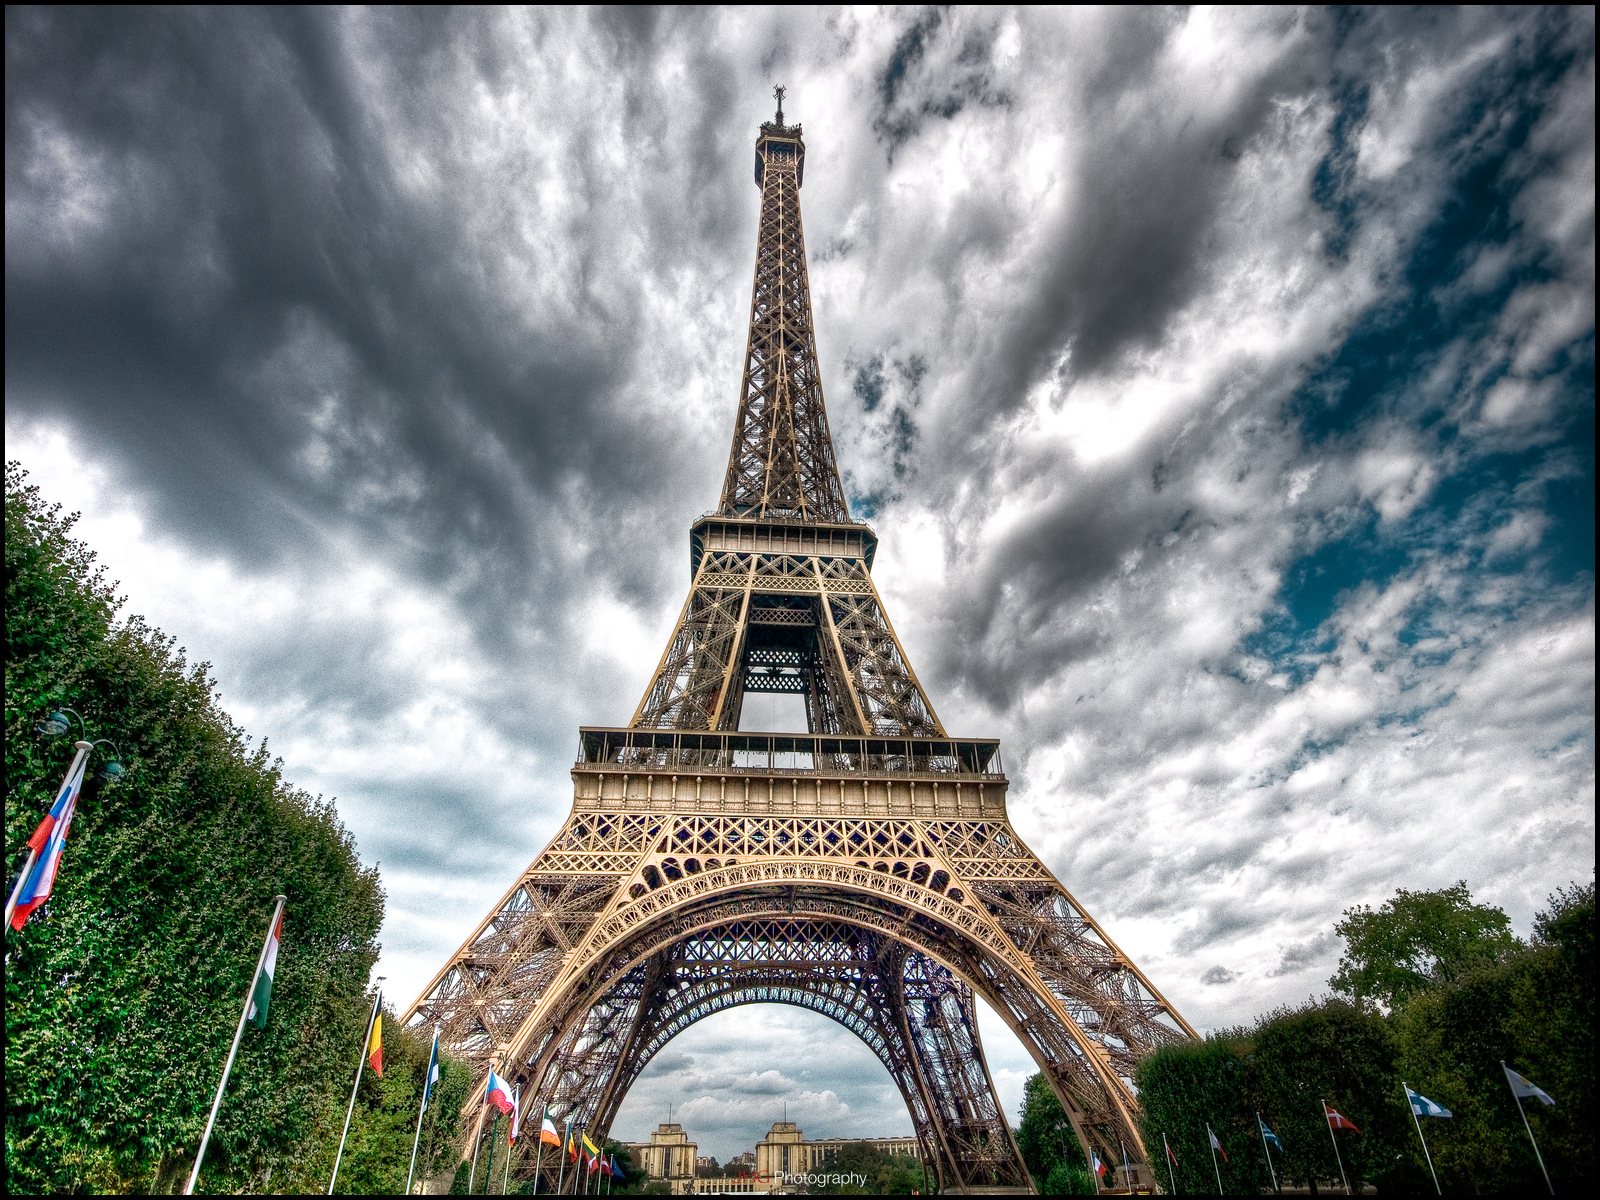 The Eiffel Tower In Paris France Eiffel Tower Pictures